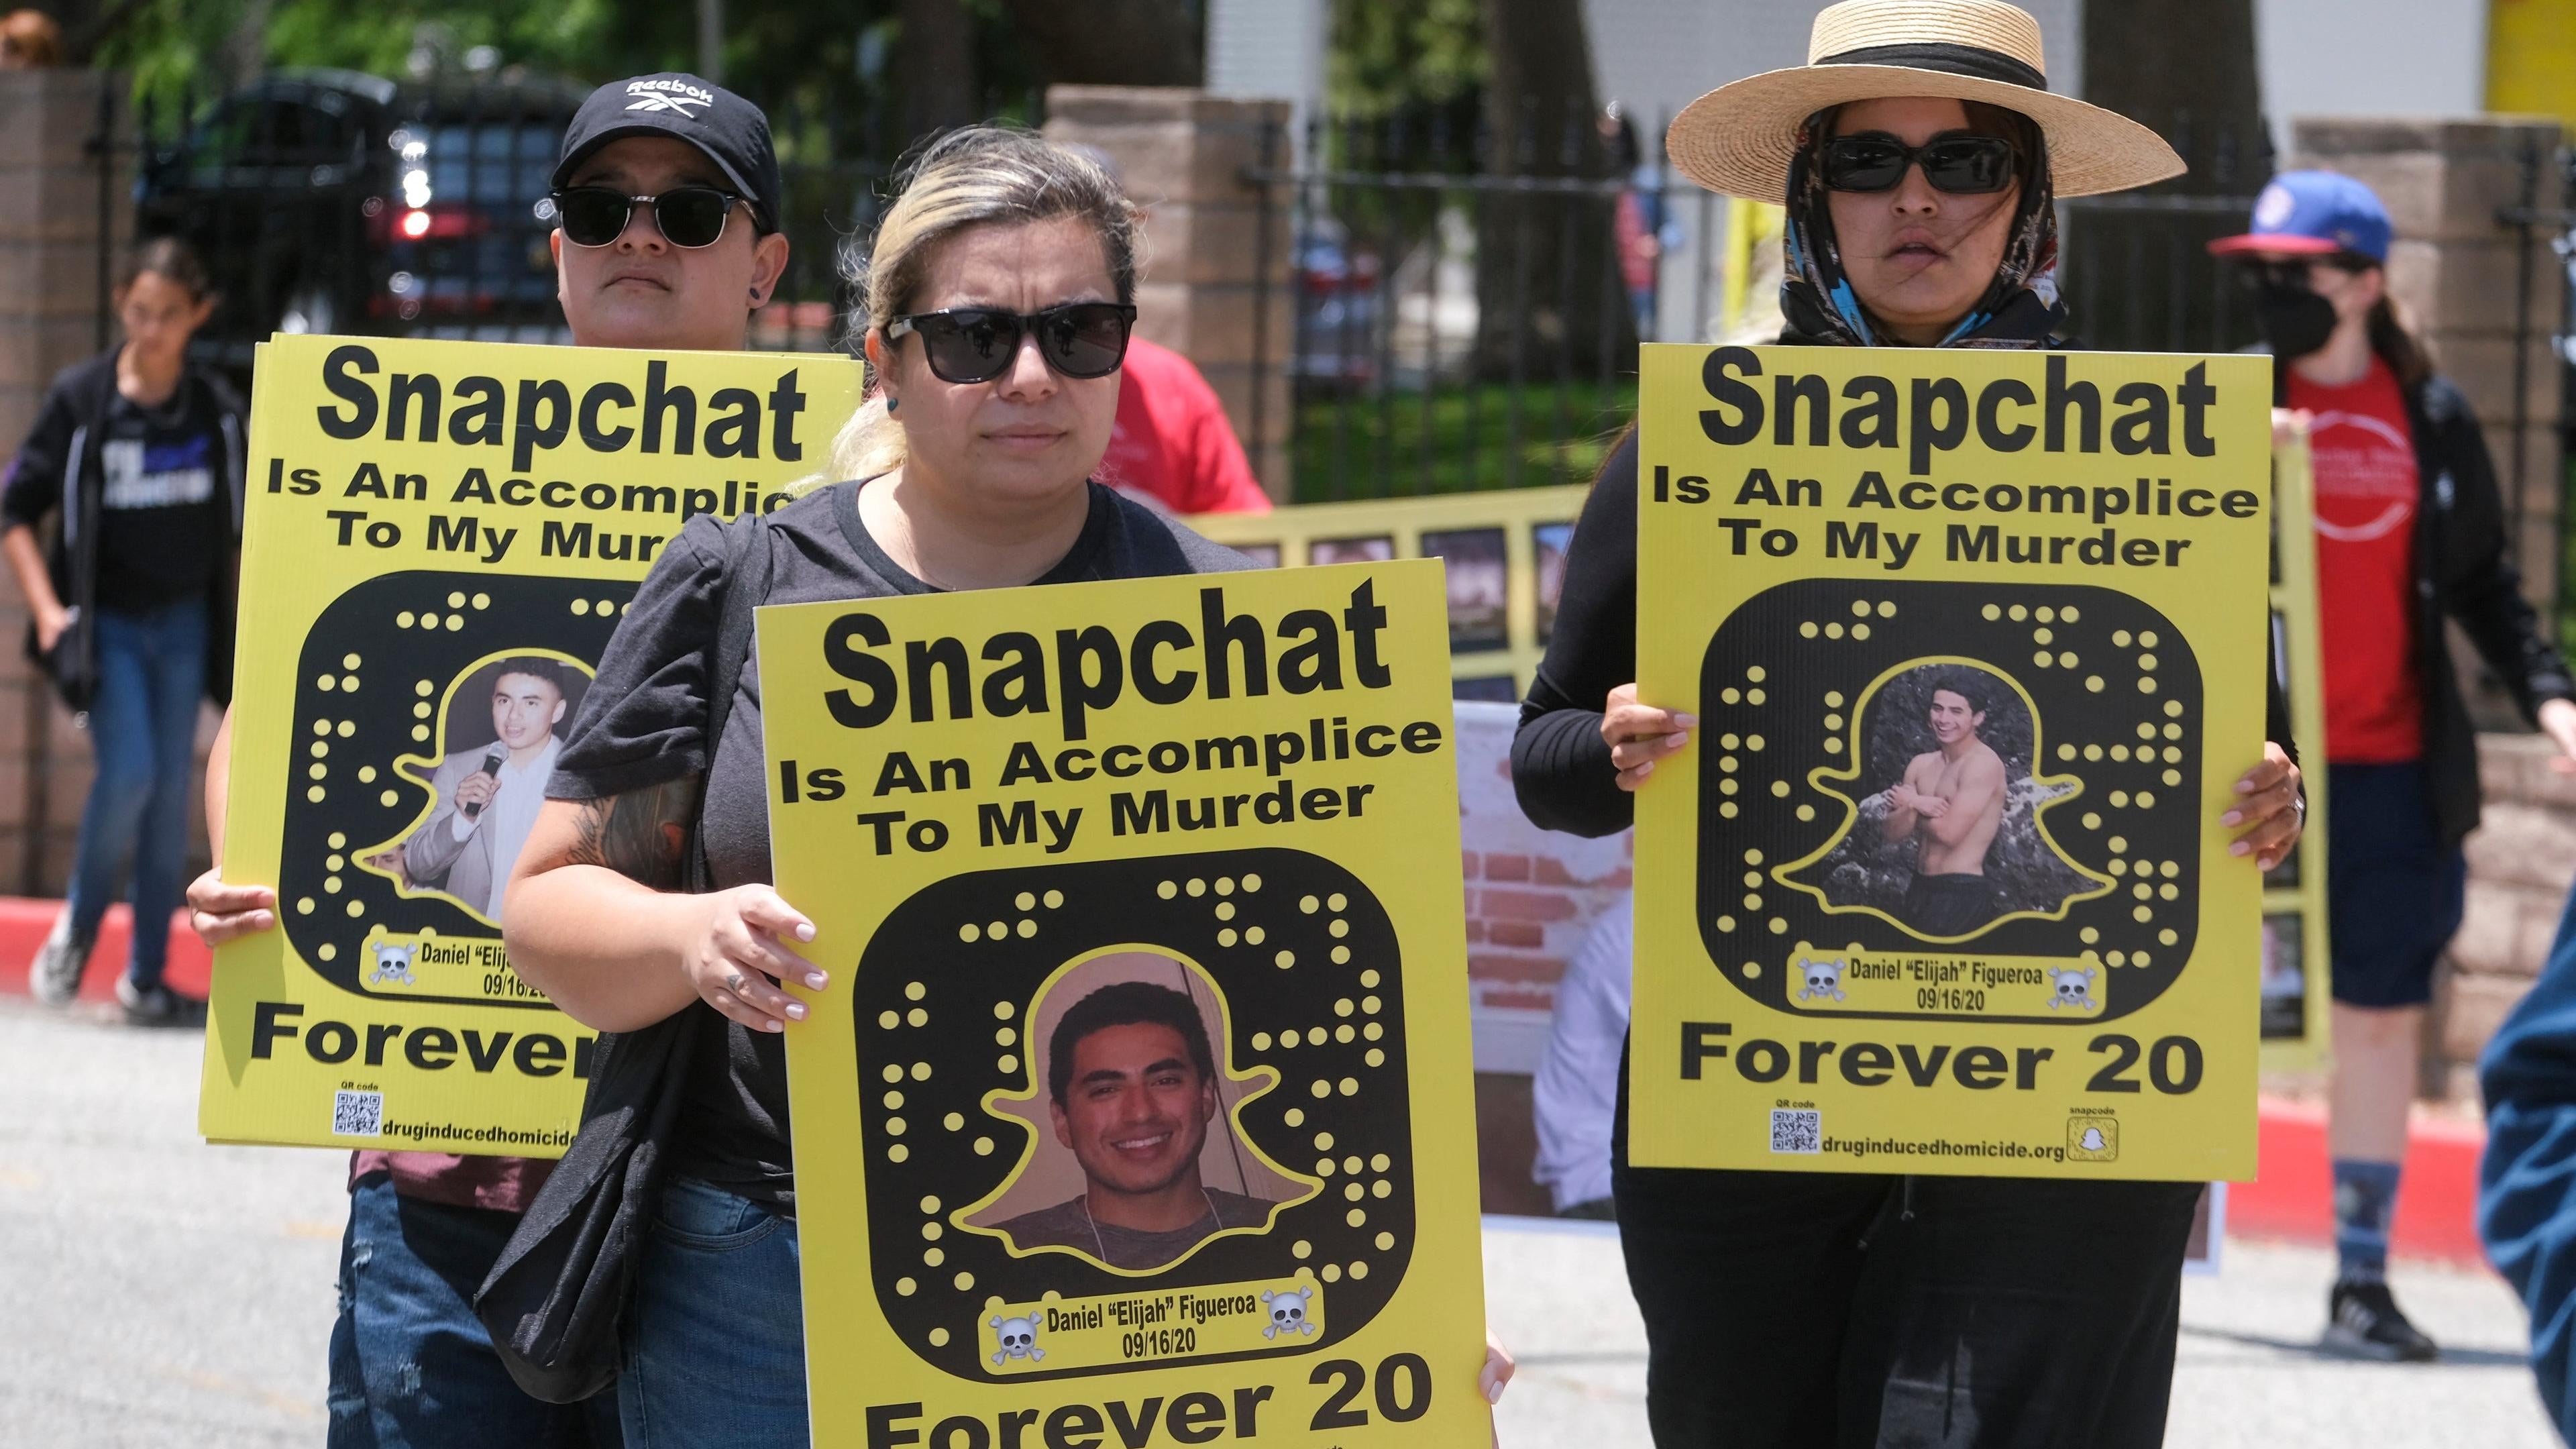 People opposed to the sale of illegal drugs on Snapchat participate in a rally outside the company's headquarters to call for tighter restrictions on the popular social media app following fatal overdoses of the powerful opioid fentanyl in Santa Monica, California, June 13, 2022. (Photo: Ringo Chiu, Getty Images)